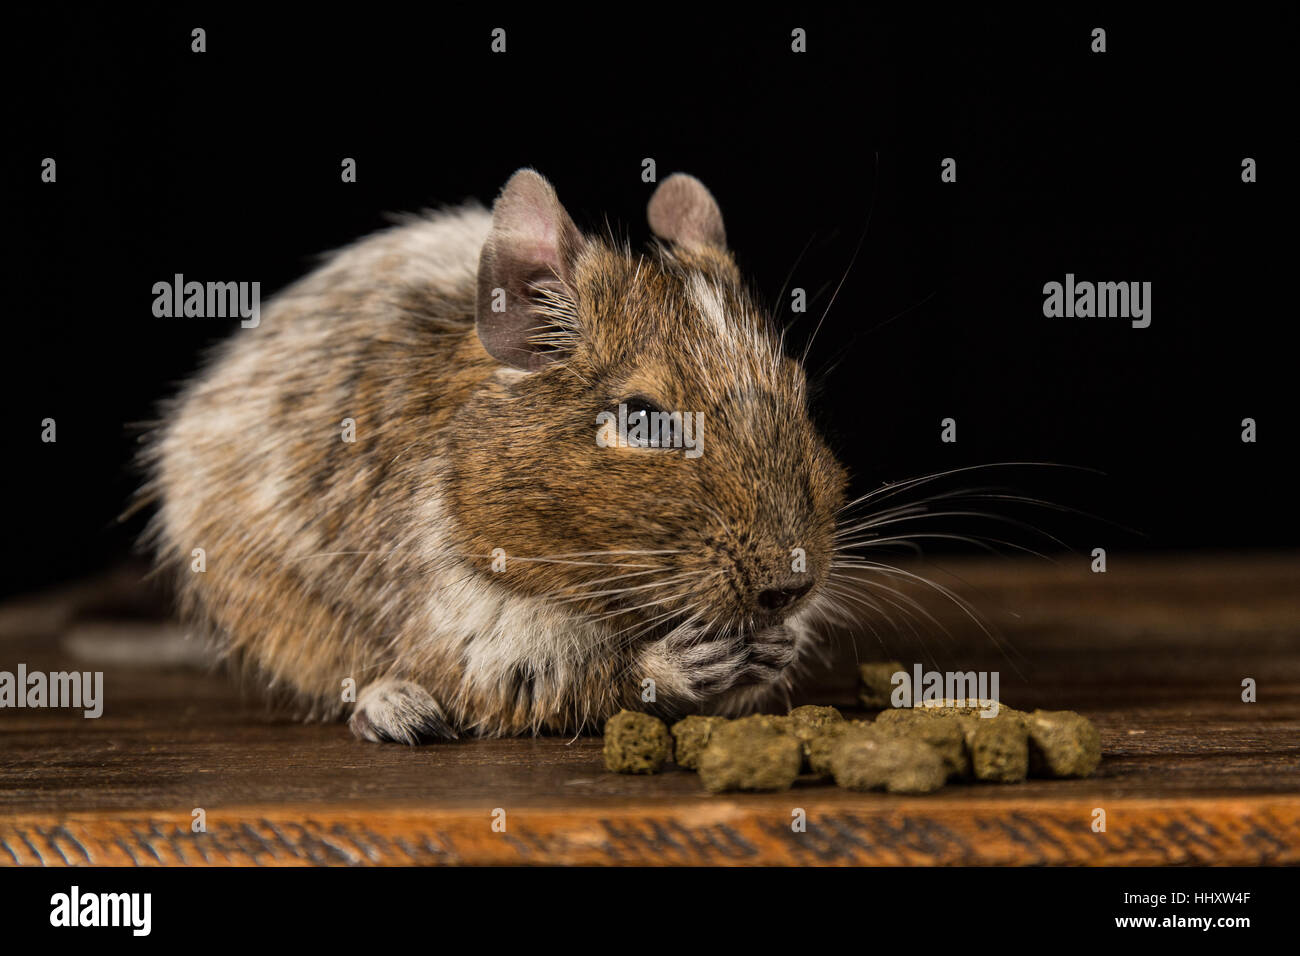 male degu sat on a wooden stool eating food photographed in a studio against a black background Stock Photo